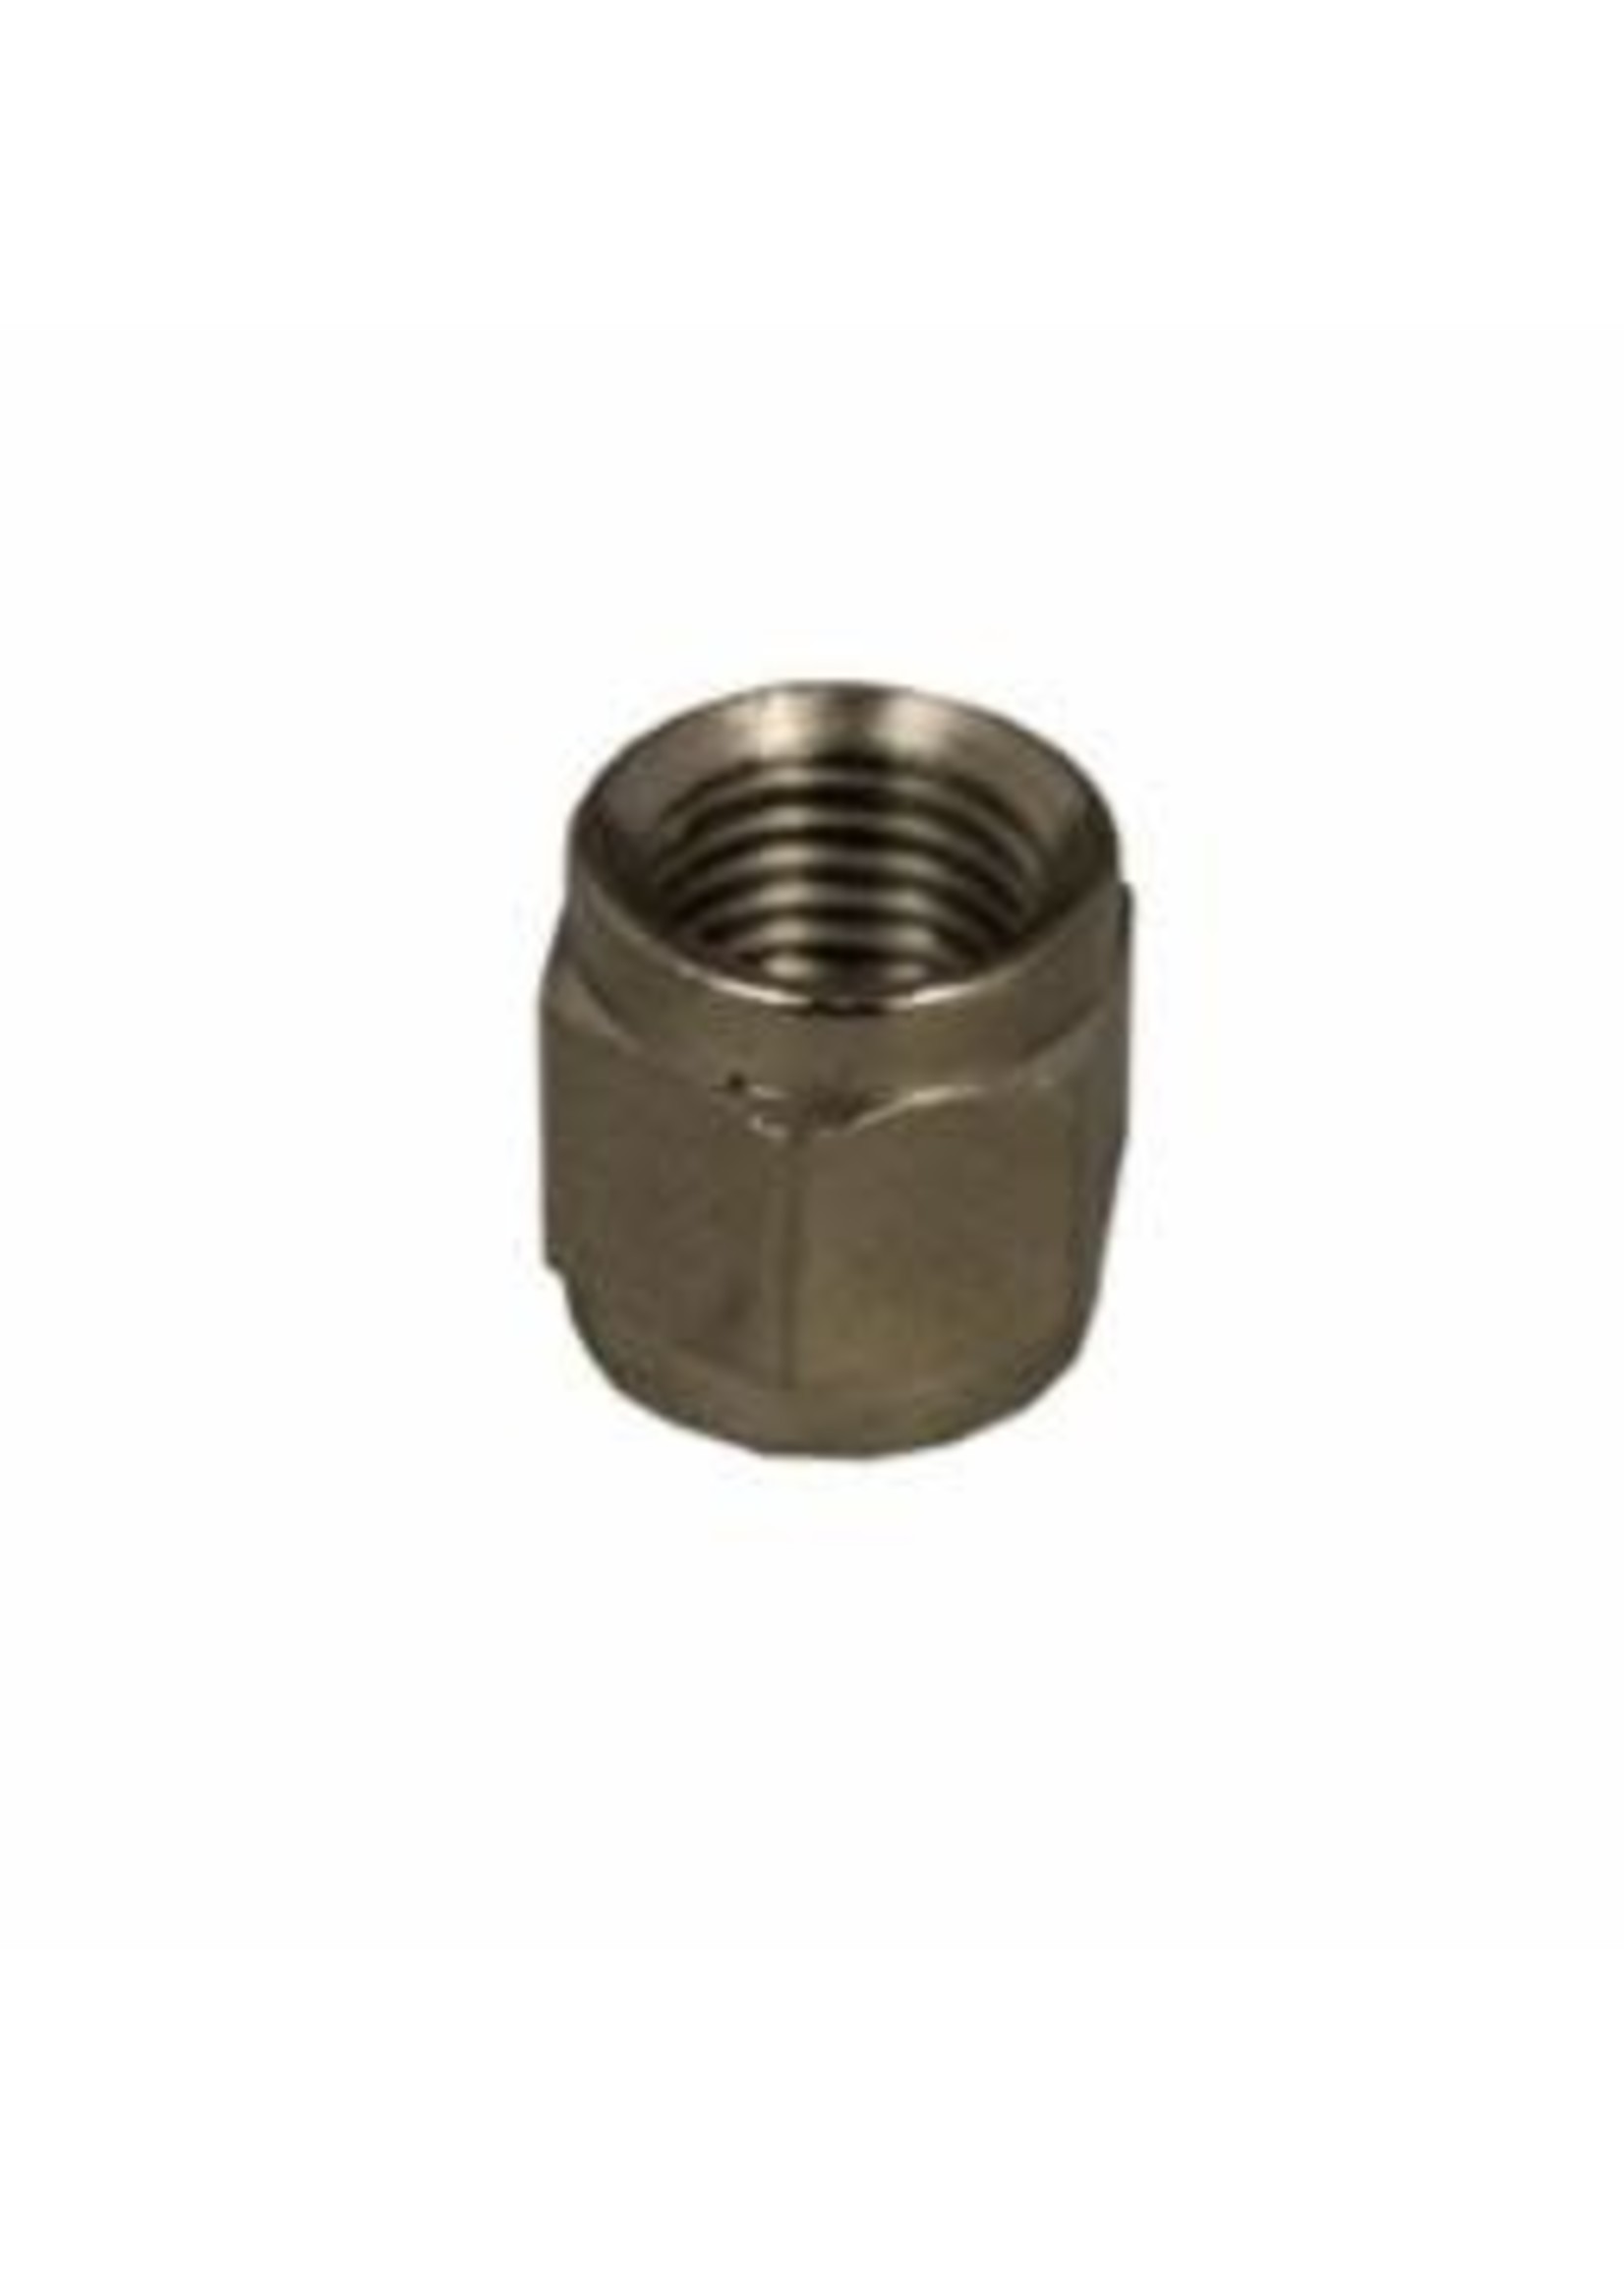 HEX NUT FOR SWIVELS